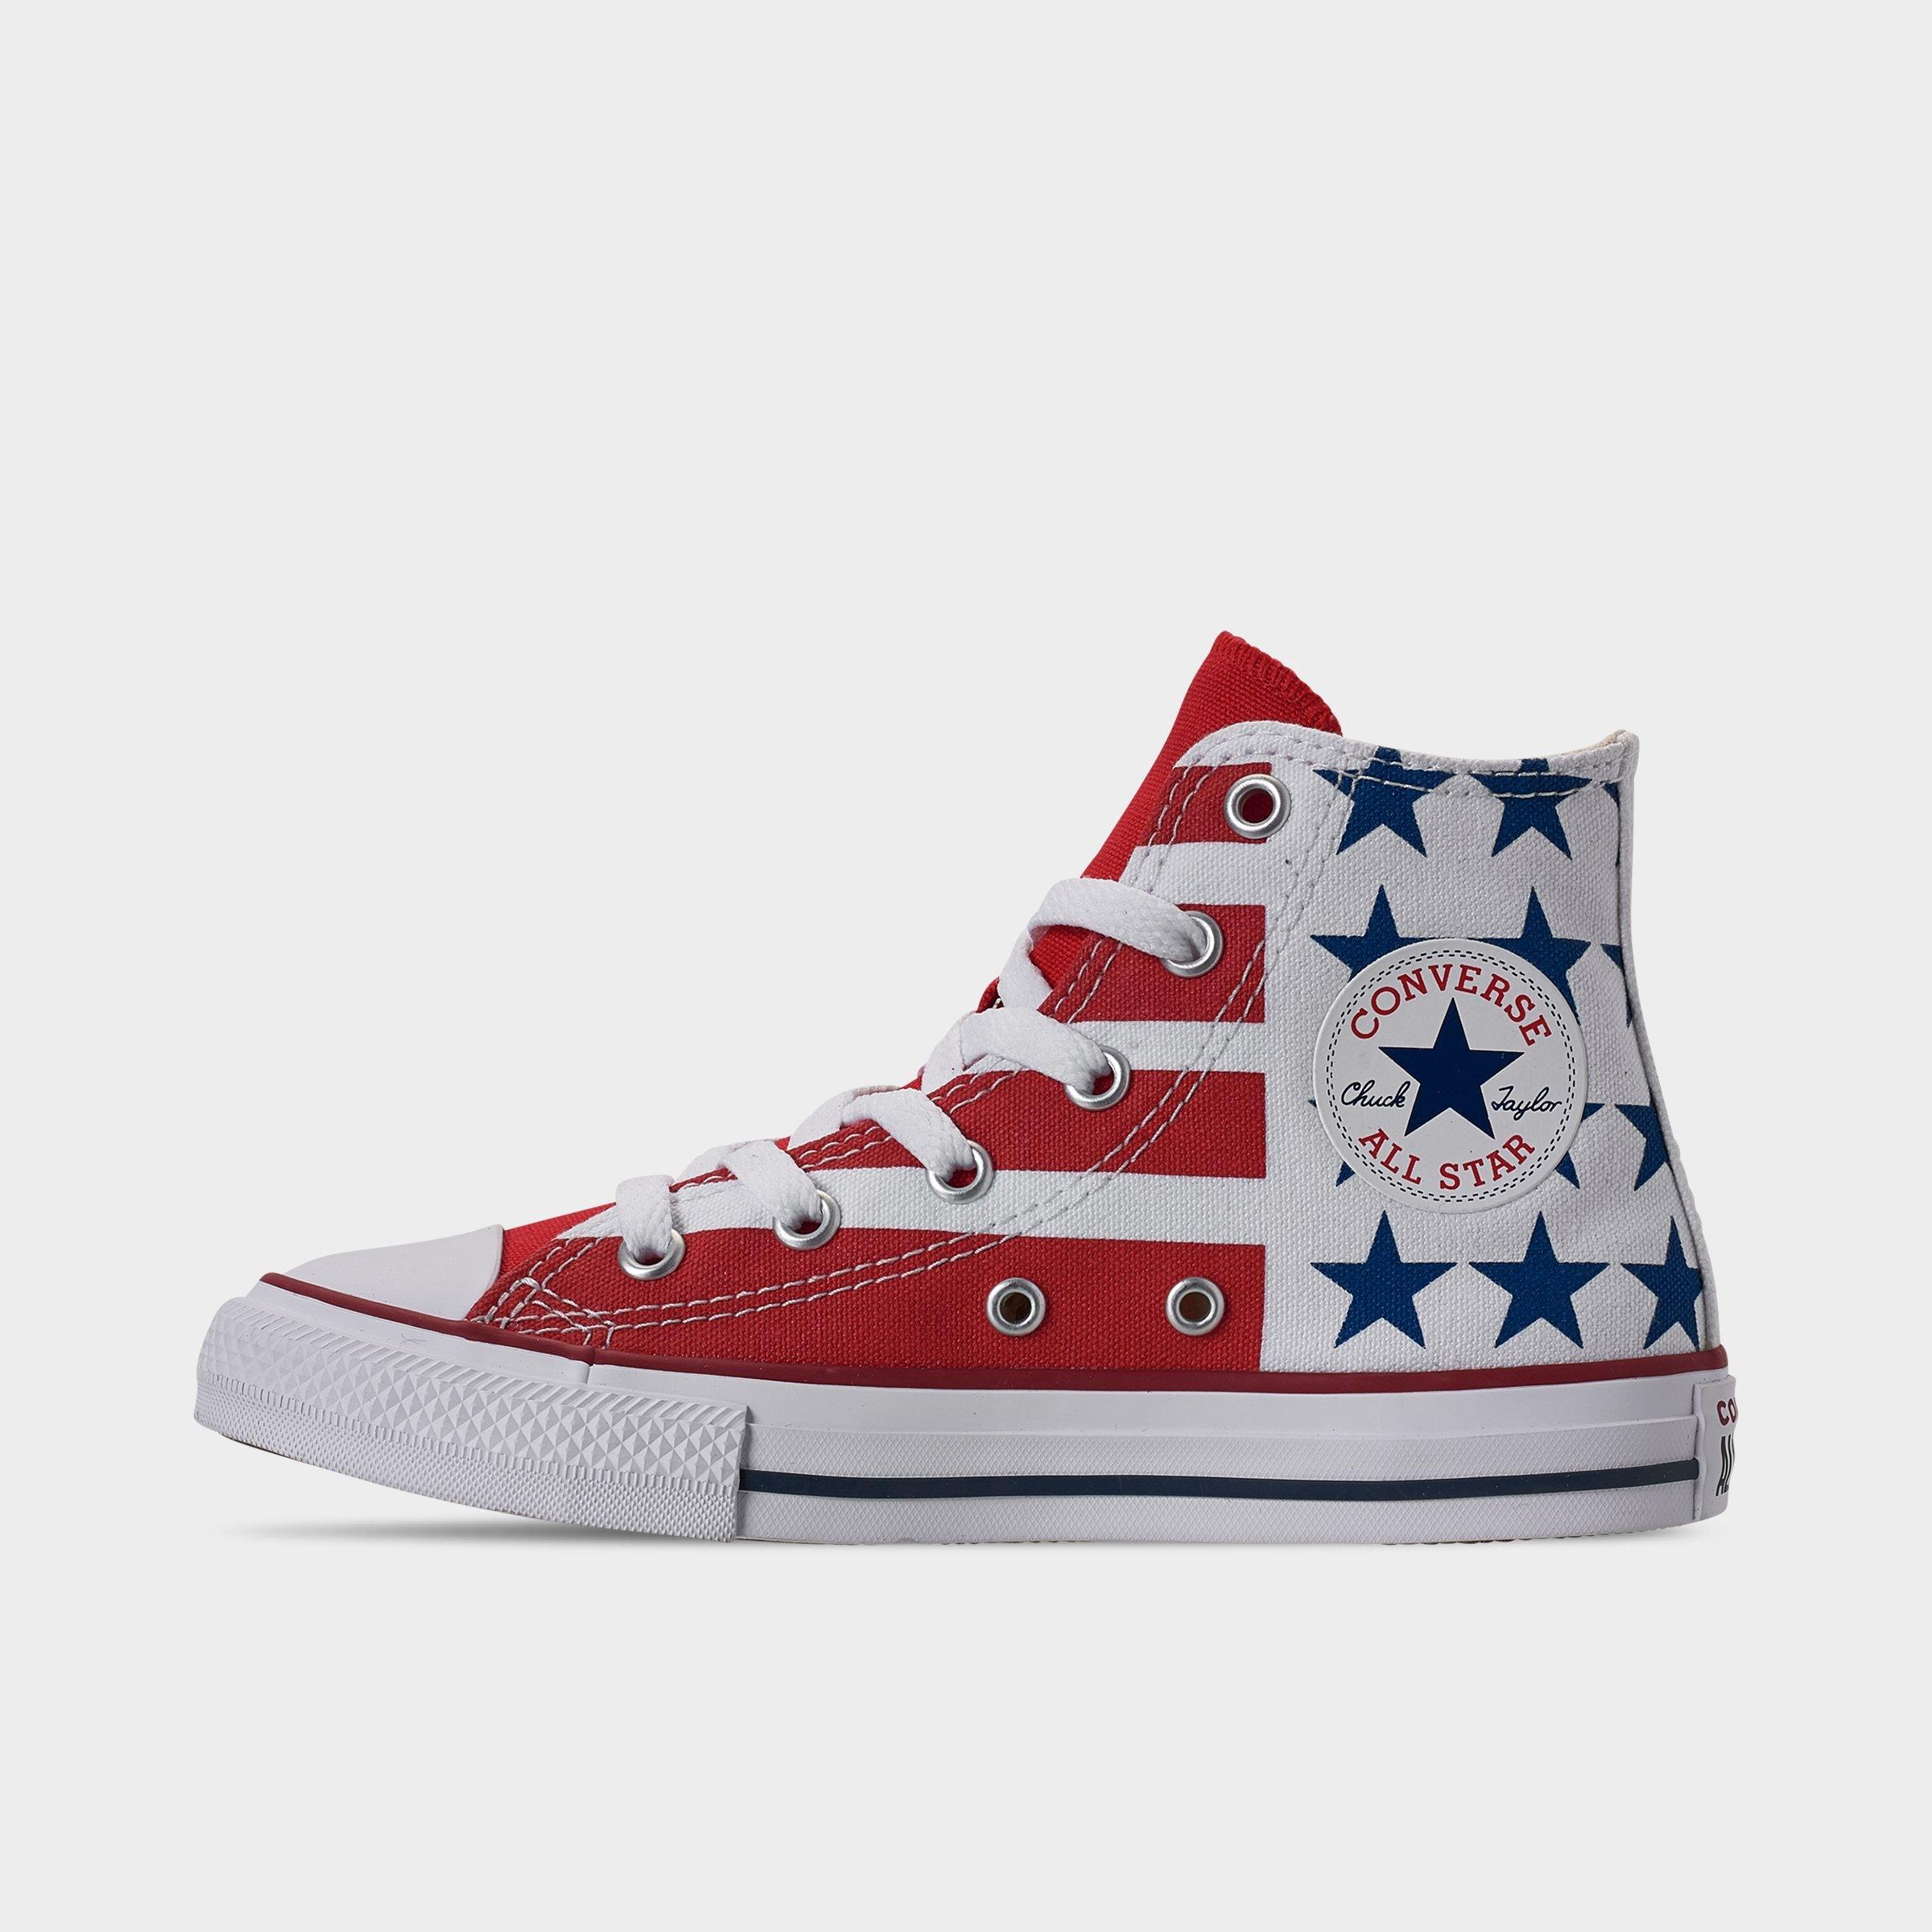 converse stars and stripes high tops